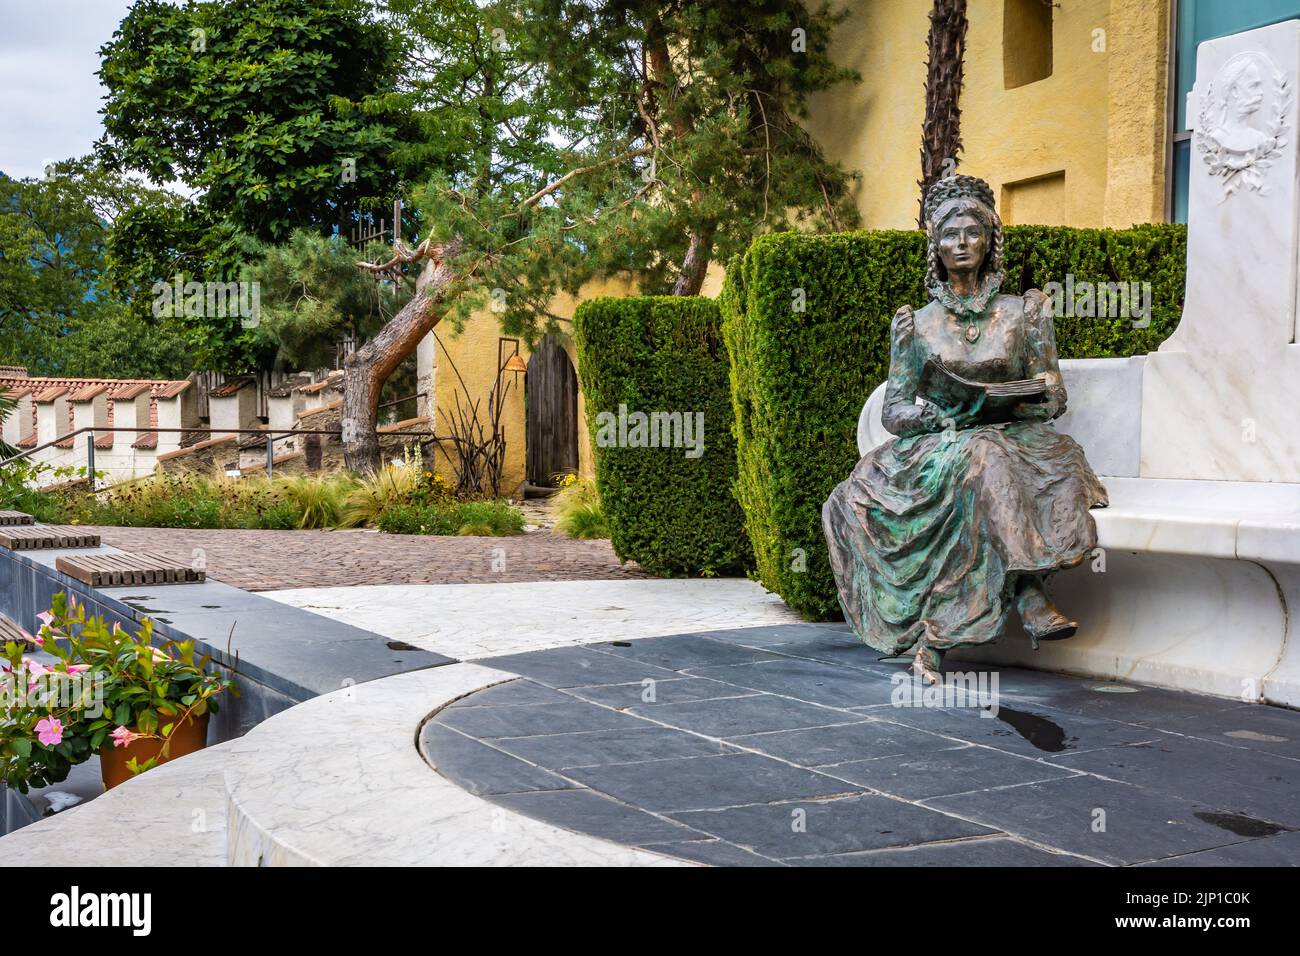 Bronze statue of Empress Sissi in the garden of Trauttmansdorff Castle, Meran, South Tyrol, Italy, Europe Stock Photo